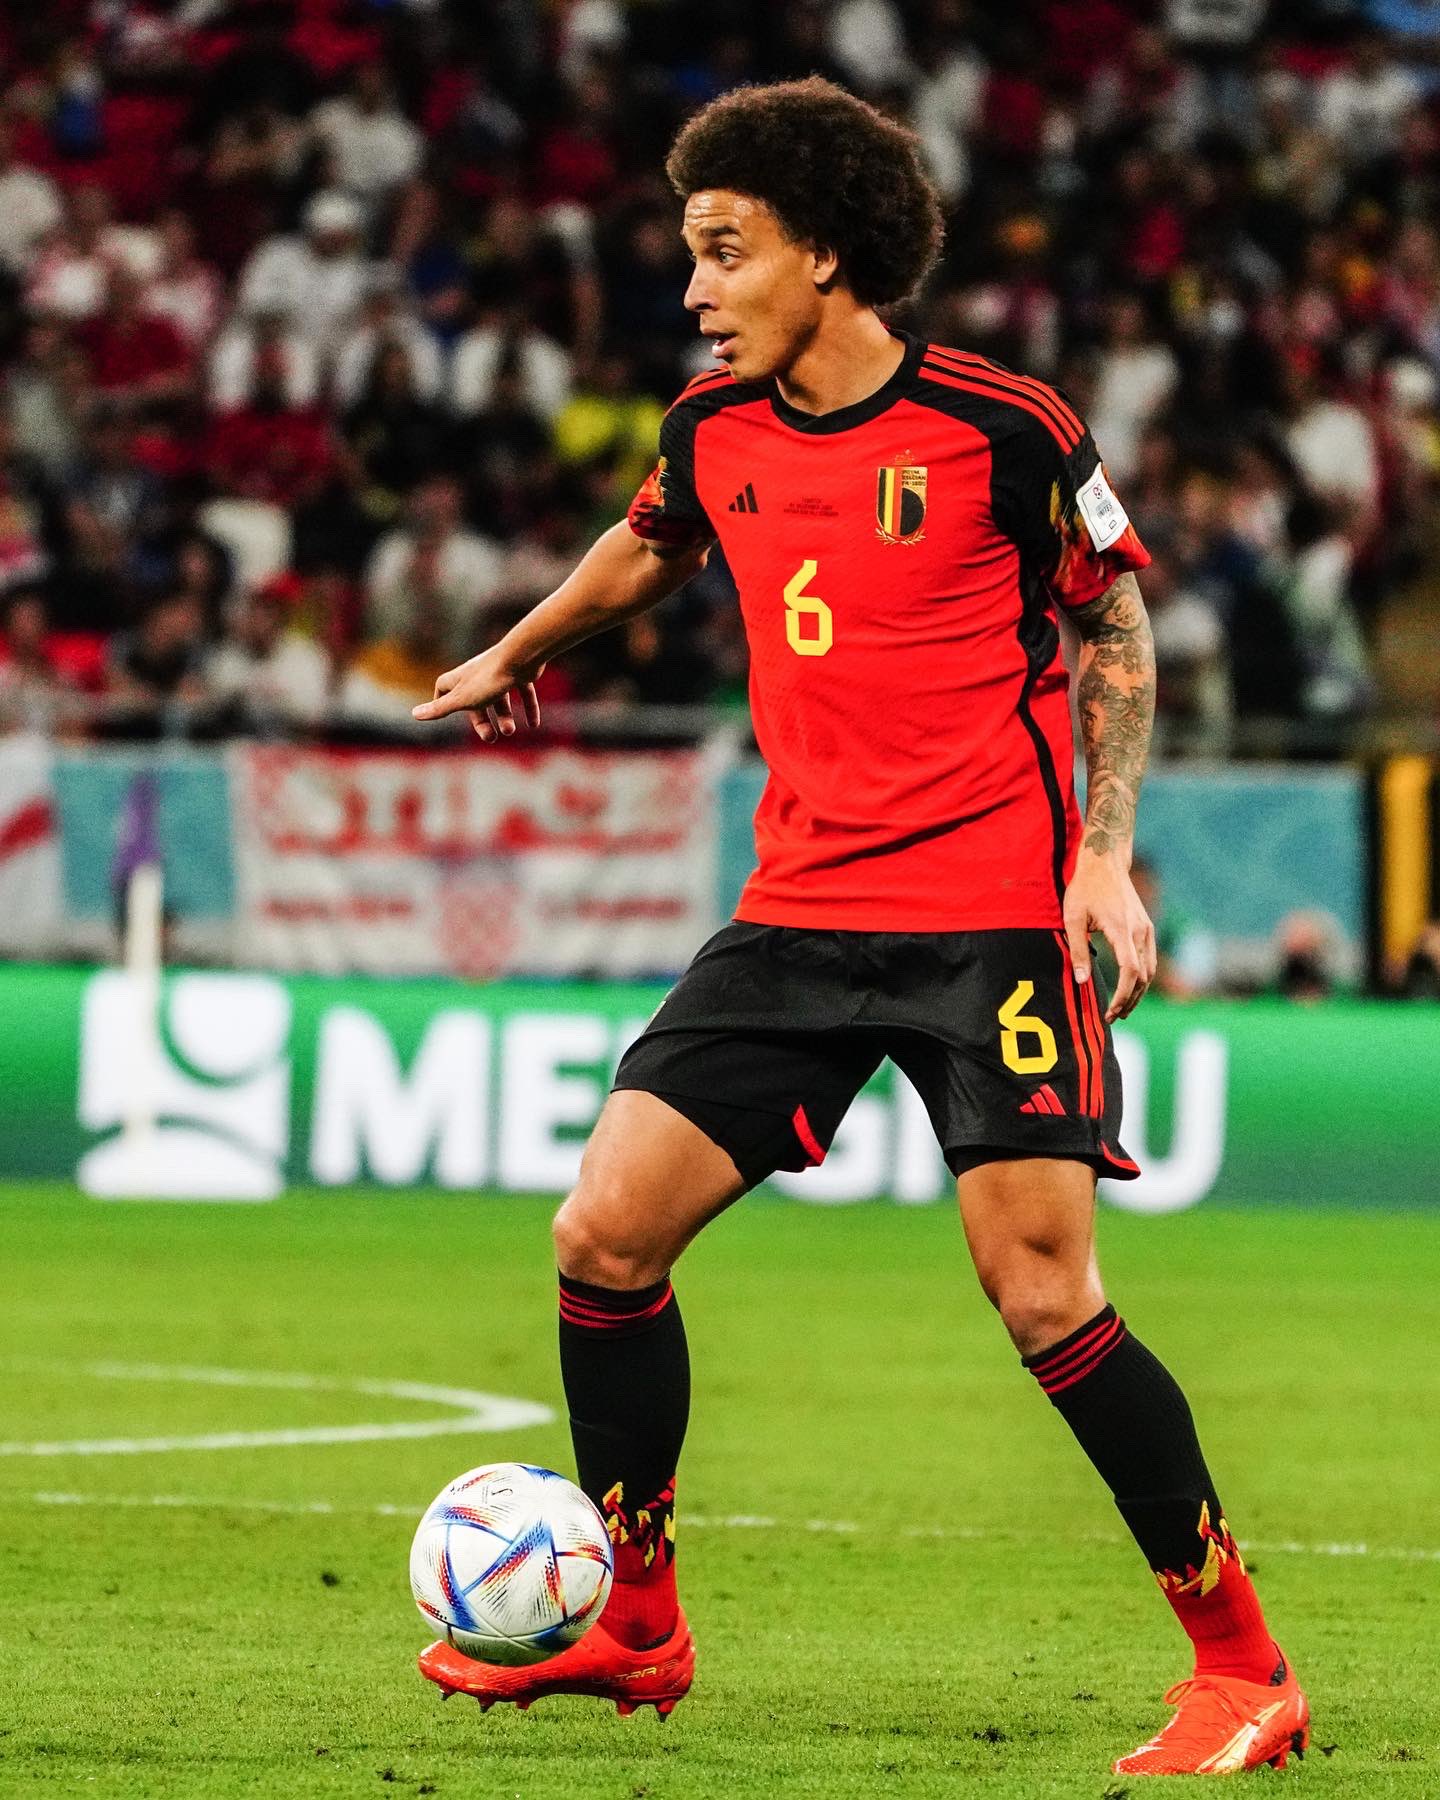 Witsel retired from Belgium NT